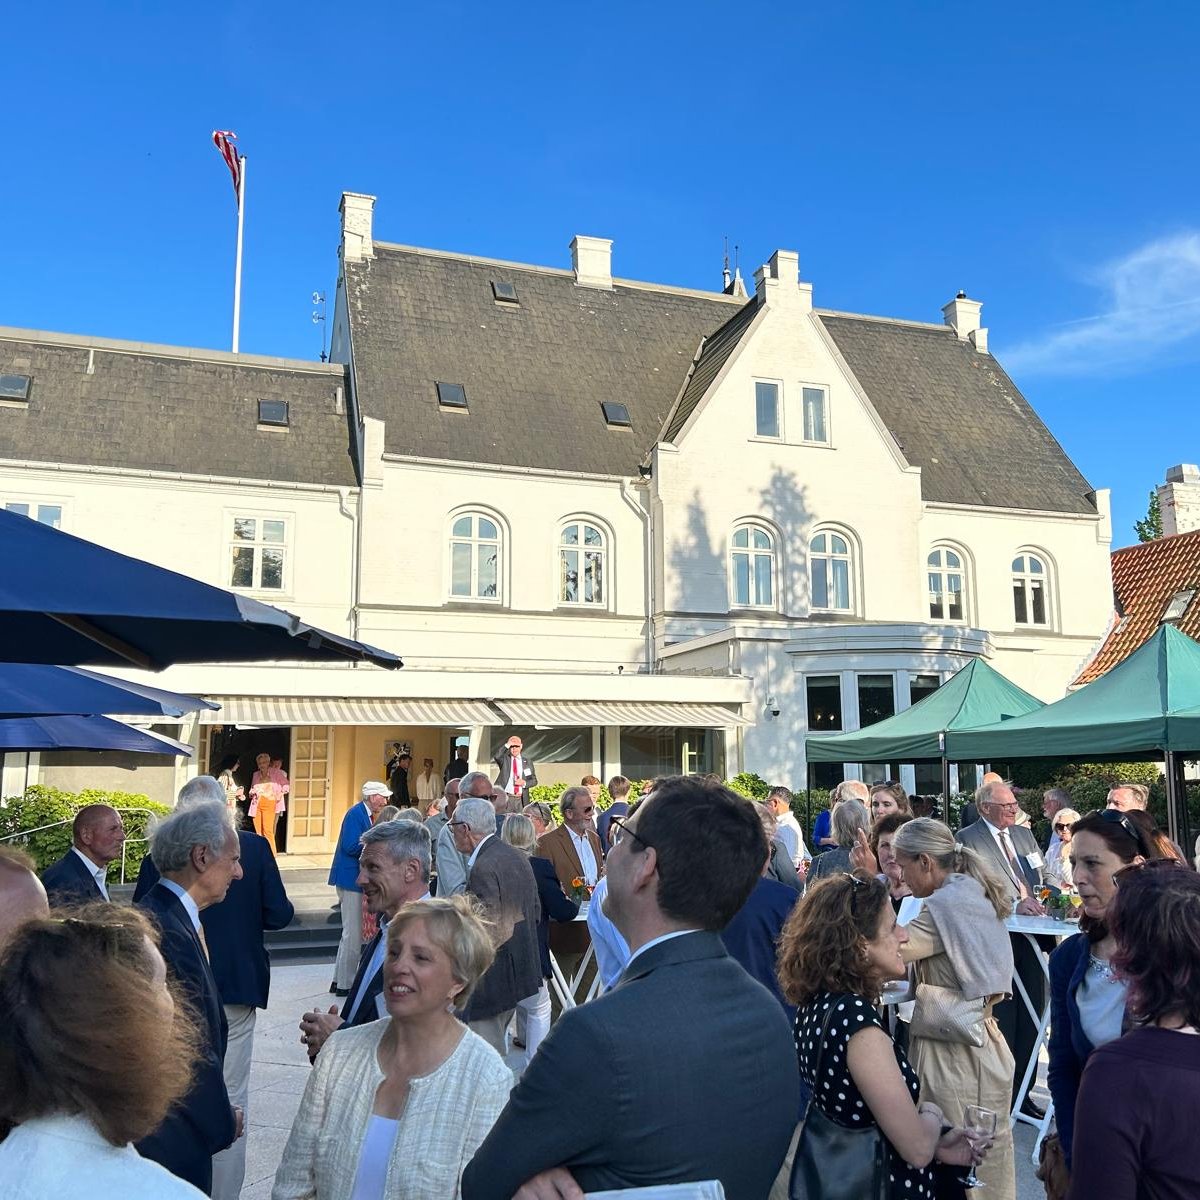 The American Club of Copenhagen is one of the oldest 🇺🇸 friendship clubs in the world. Great to host them at Rydhave for their annual spring garden party. Thank you for all you do to foster the 🇺🇸 🇩🇰 partnership.